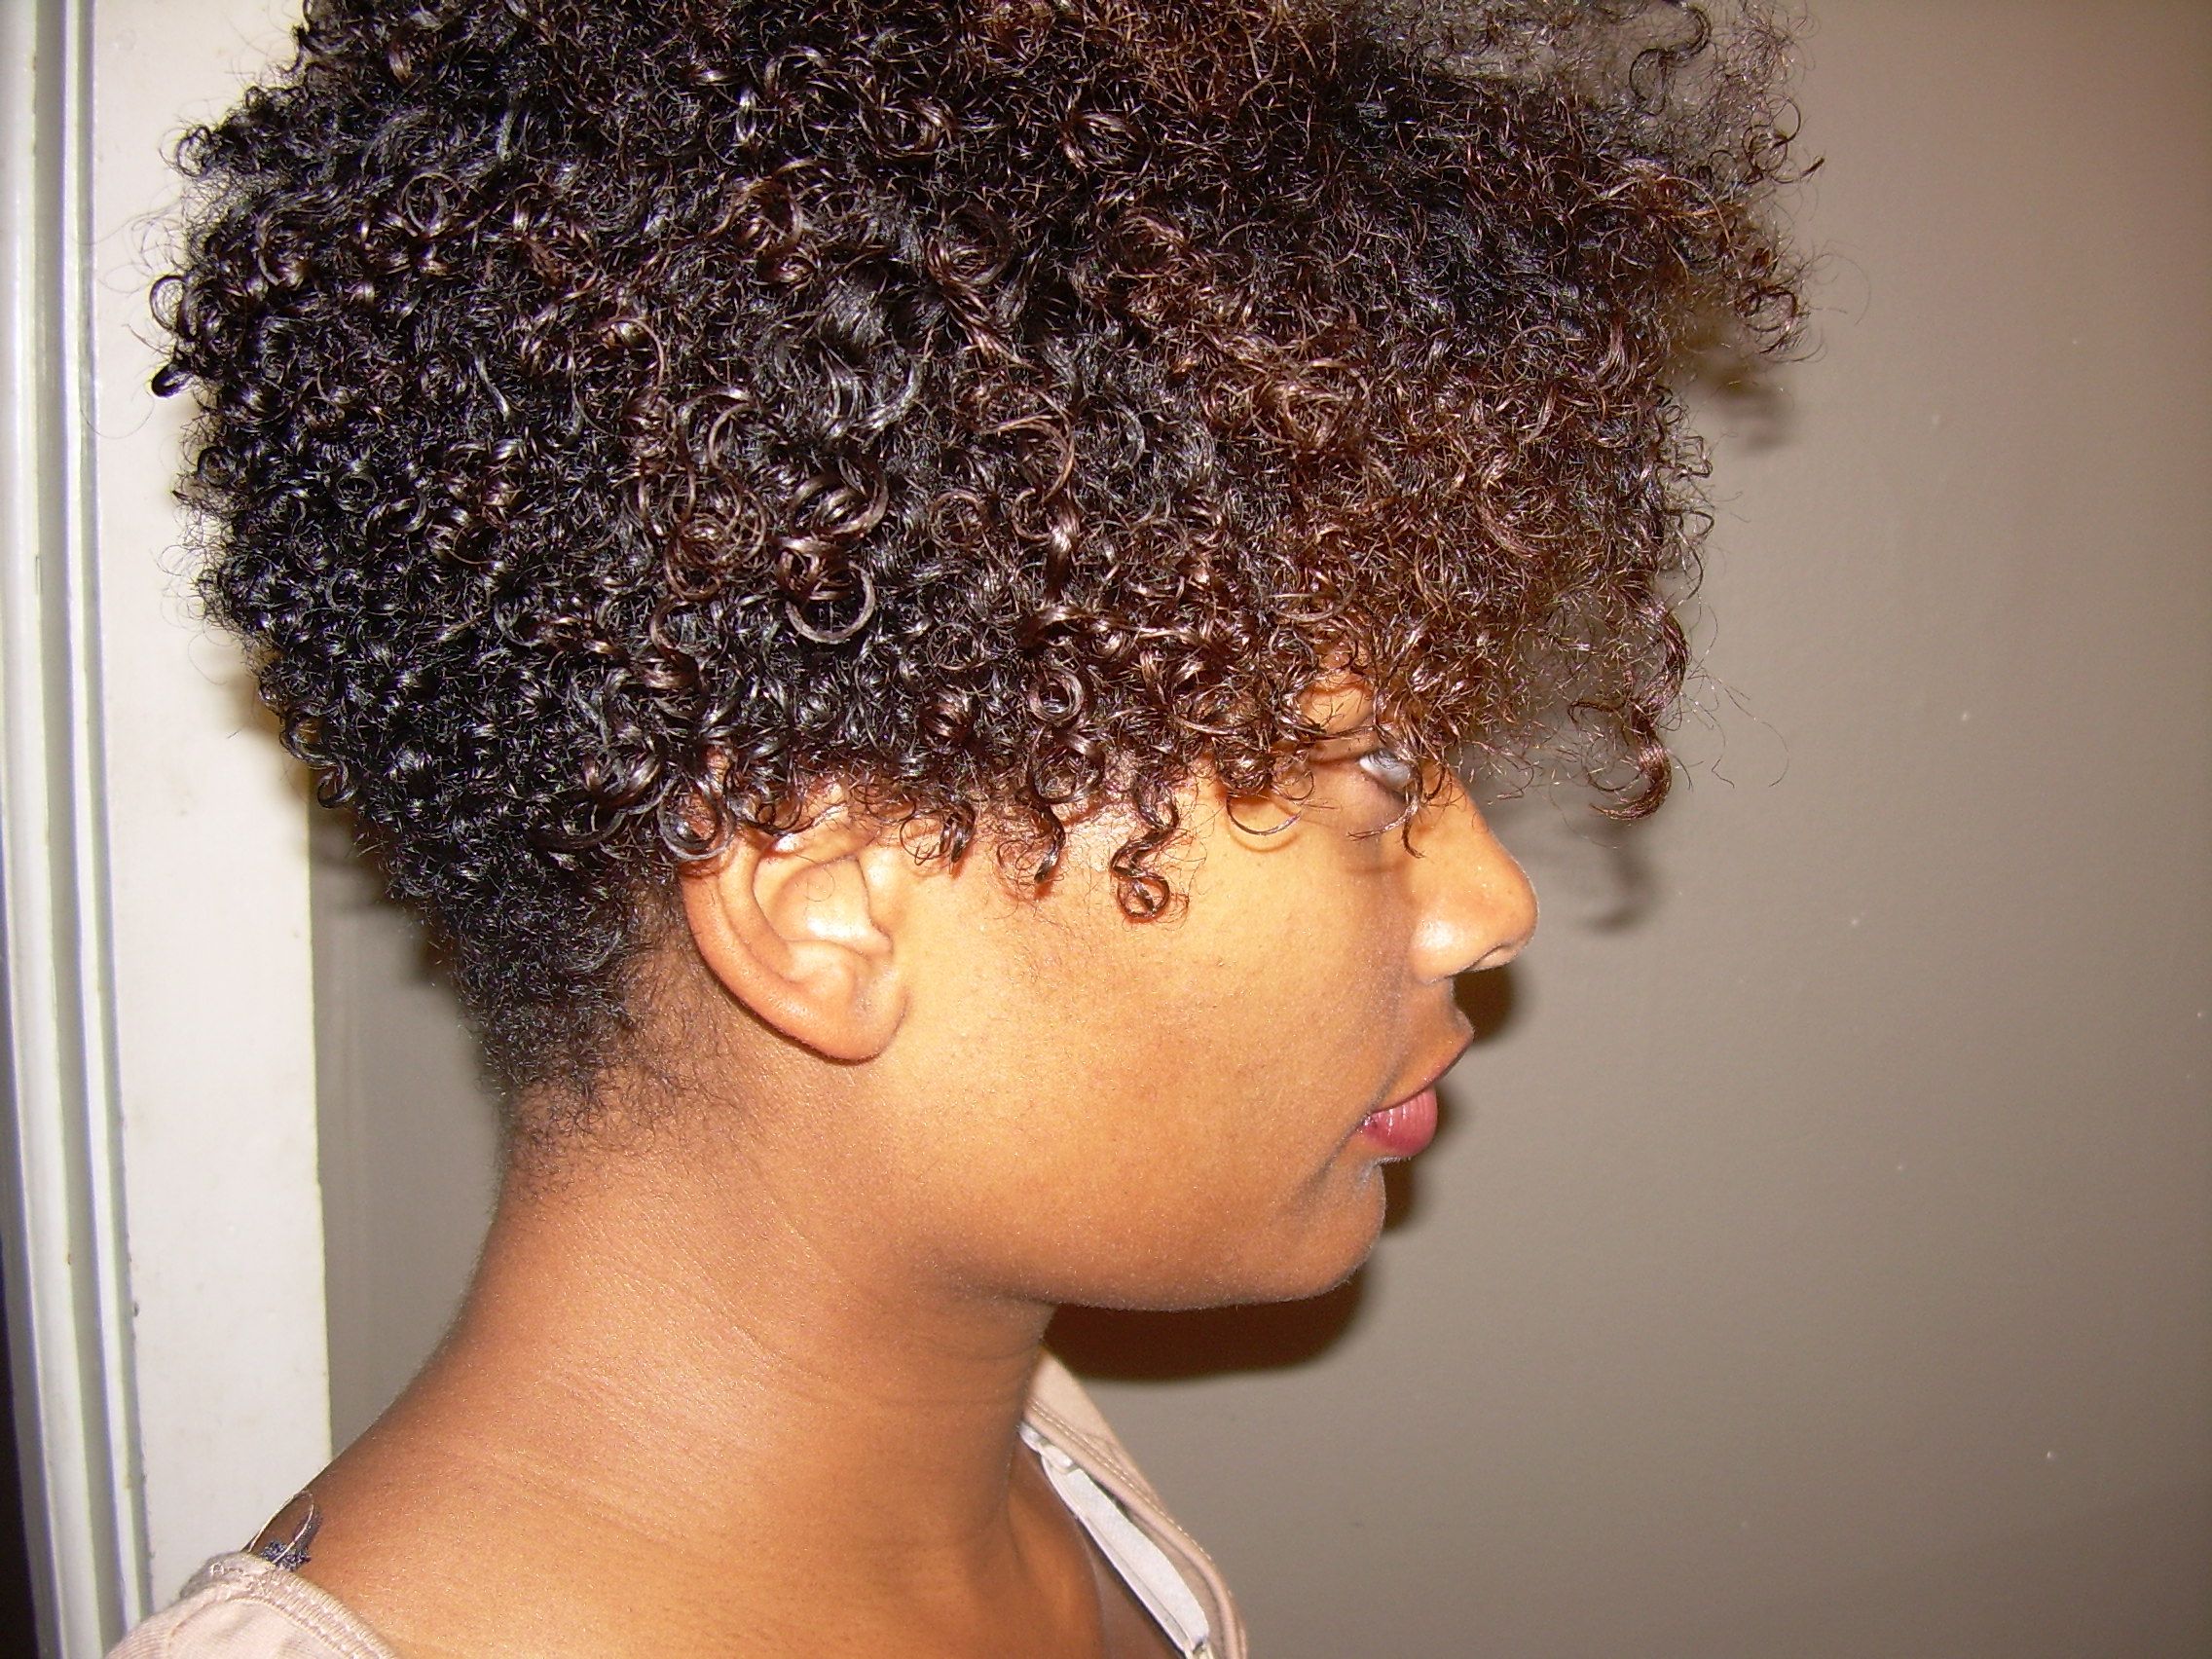 Endearing Black Short Natural Curly Hairstyles In Tapered Twa Regarding Curly Black Short Hairstyles (View 23 of 25)